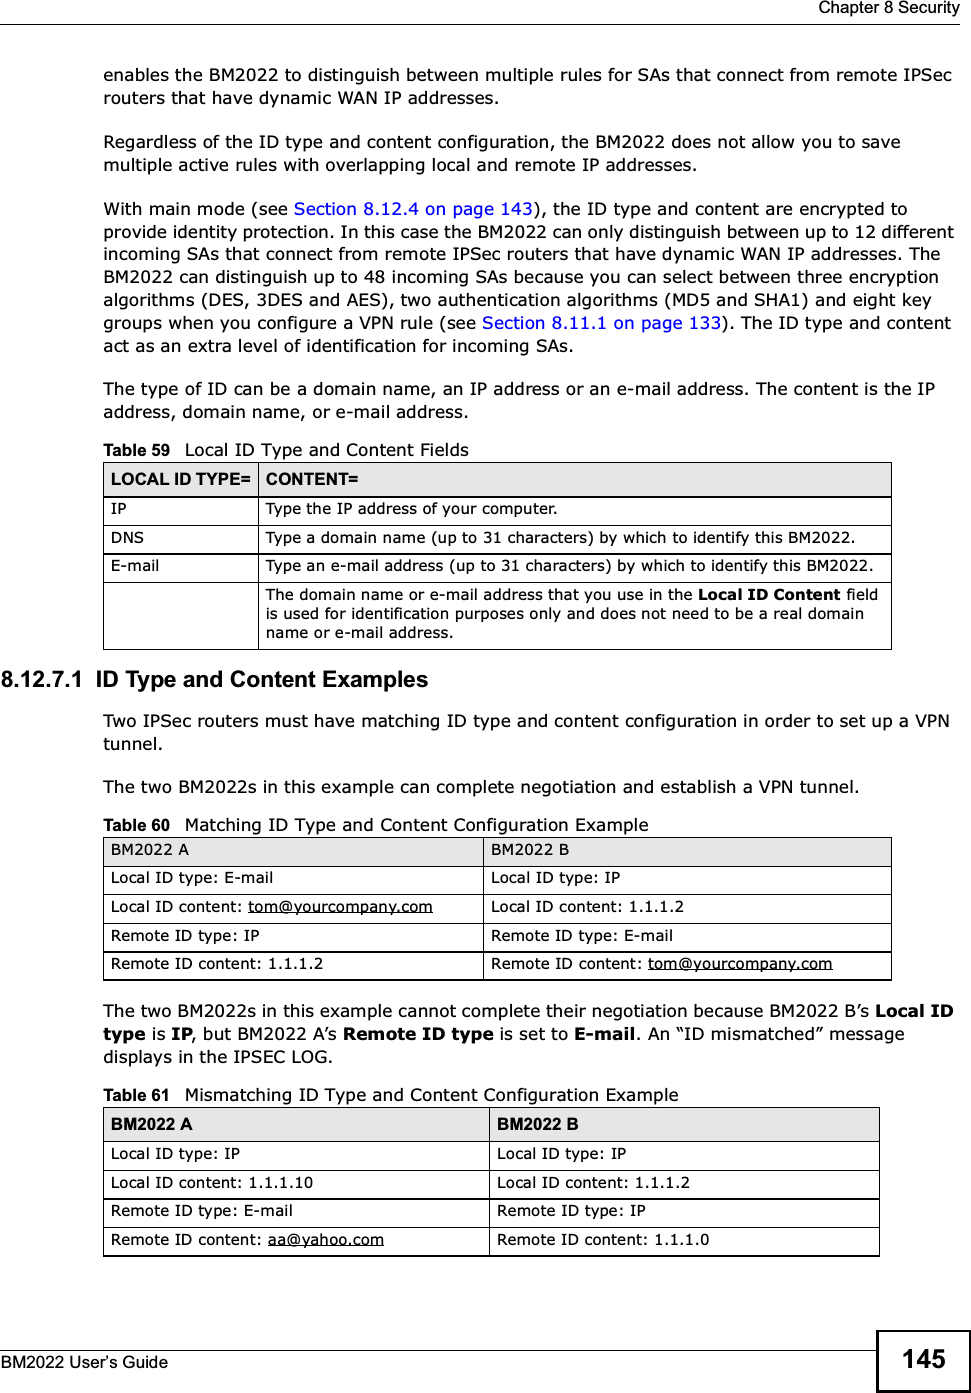  Chapter 8 SecurityBM2022 Users Guide 145enables the BM2022 to distinguish between multiple rules for SAs that connect from remote IPSec routers that have dynamic WAN IP addresses.Regardless of the ID type and content configuration, the BM2022 does not allow you to save multiple active rules with overlapping local and remote IP addresses.With main mode (see Section 8.12.4 on page 143), the ID type and content are encrypted to provide identity protection. In this case the BM2022 can only distinguish between up to 12 different incoming SAs that connect from remote IPSec routers that have dynamic WAN IP addresses. The BM2022 can distinguish up to 48 incoming SAs because you can select between three encryption algorithms (DES, 3DES and AES), two authentication algorithms (MD5 and SHA1) and eight key groups when you configure a VPN rule (see Section 8.11.1 on page 133). The ID type and content act as an extra level of identification for incoming SAs.The type of ID can be a domain name, an IP address or an e-mail address. The content is the IP address, domain name, or e-mail address. 8.12.7.1  ID Type and Content ExamplesTwo IPSec routers must have matching ID type and content configuration in order to set up a VPN tunnel. The two BM2022s in this example can complete negotiation and establish a VPN tunnel.The two BM2022s in this example cannot complete their negotiation because BM2022 Bs Local ID type is IP, but BM2022 As Remote ID type is set to E-mail. An ID mismatched message displays in the IPSEC LOG. Table 59   Local ID Type and Content FieldsLOCAL ID TYPE= CONTENT=IP Type the IP address of your computer.DNS Type a domain name (up to 31 characters) by which to identify this BM2022.E-mail Type an e-mail address (up to 31 characters) by which to identify this BM2022.The domain name or e-mail address that you use in the Local ID Content field is used for identification purposes only and does not need to be a real domain name or e-mail address.Table 60   Matching ID Type and Content Configuration ExampleBM2022 A BM2022 BLocal ID type: E-mail Local ID type: IPLocal ID content: tom@yourcompany.com Local ID content: 1.1.1.2Remote ID type: IP Remote ID type: E-mailRemote ID content: 1.1.1.2 Remote ID content: tom@yourcompany.comTable 61   Mismatching ID Type and Content Configuration ExampleBM2022 A BM2022 BLocal ID type: IP Local ID type: IPLocal ID content: 1.1.1.10 Local ID content: 1.1.1.2Remote ID type: E-mail Remote ID type: IPRemote ID content: aa@yahoo.com Remote ID content: 1.1.1.0